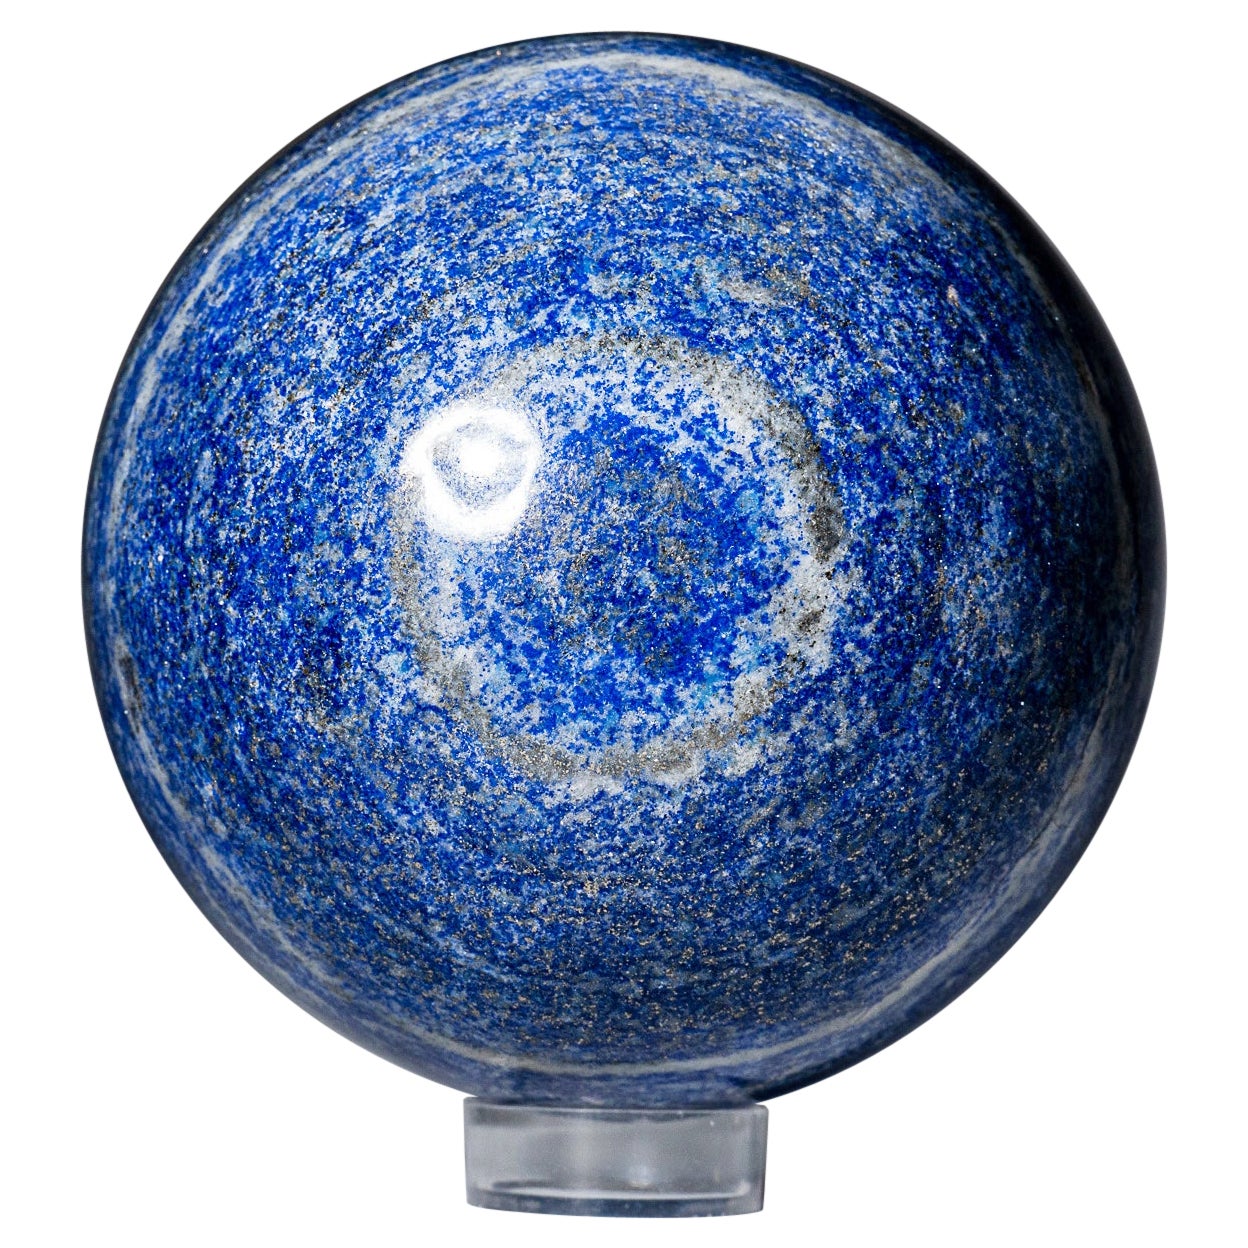 Polished Lapis Lazuli Sphere from Afghanistan (4", 5.2 lbs) For Sale